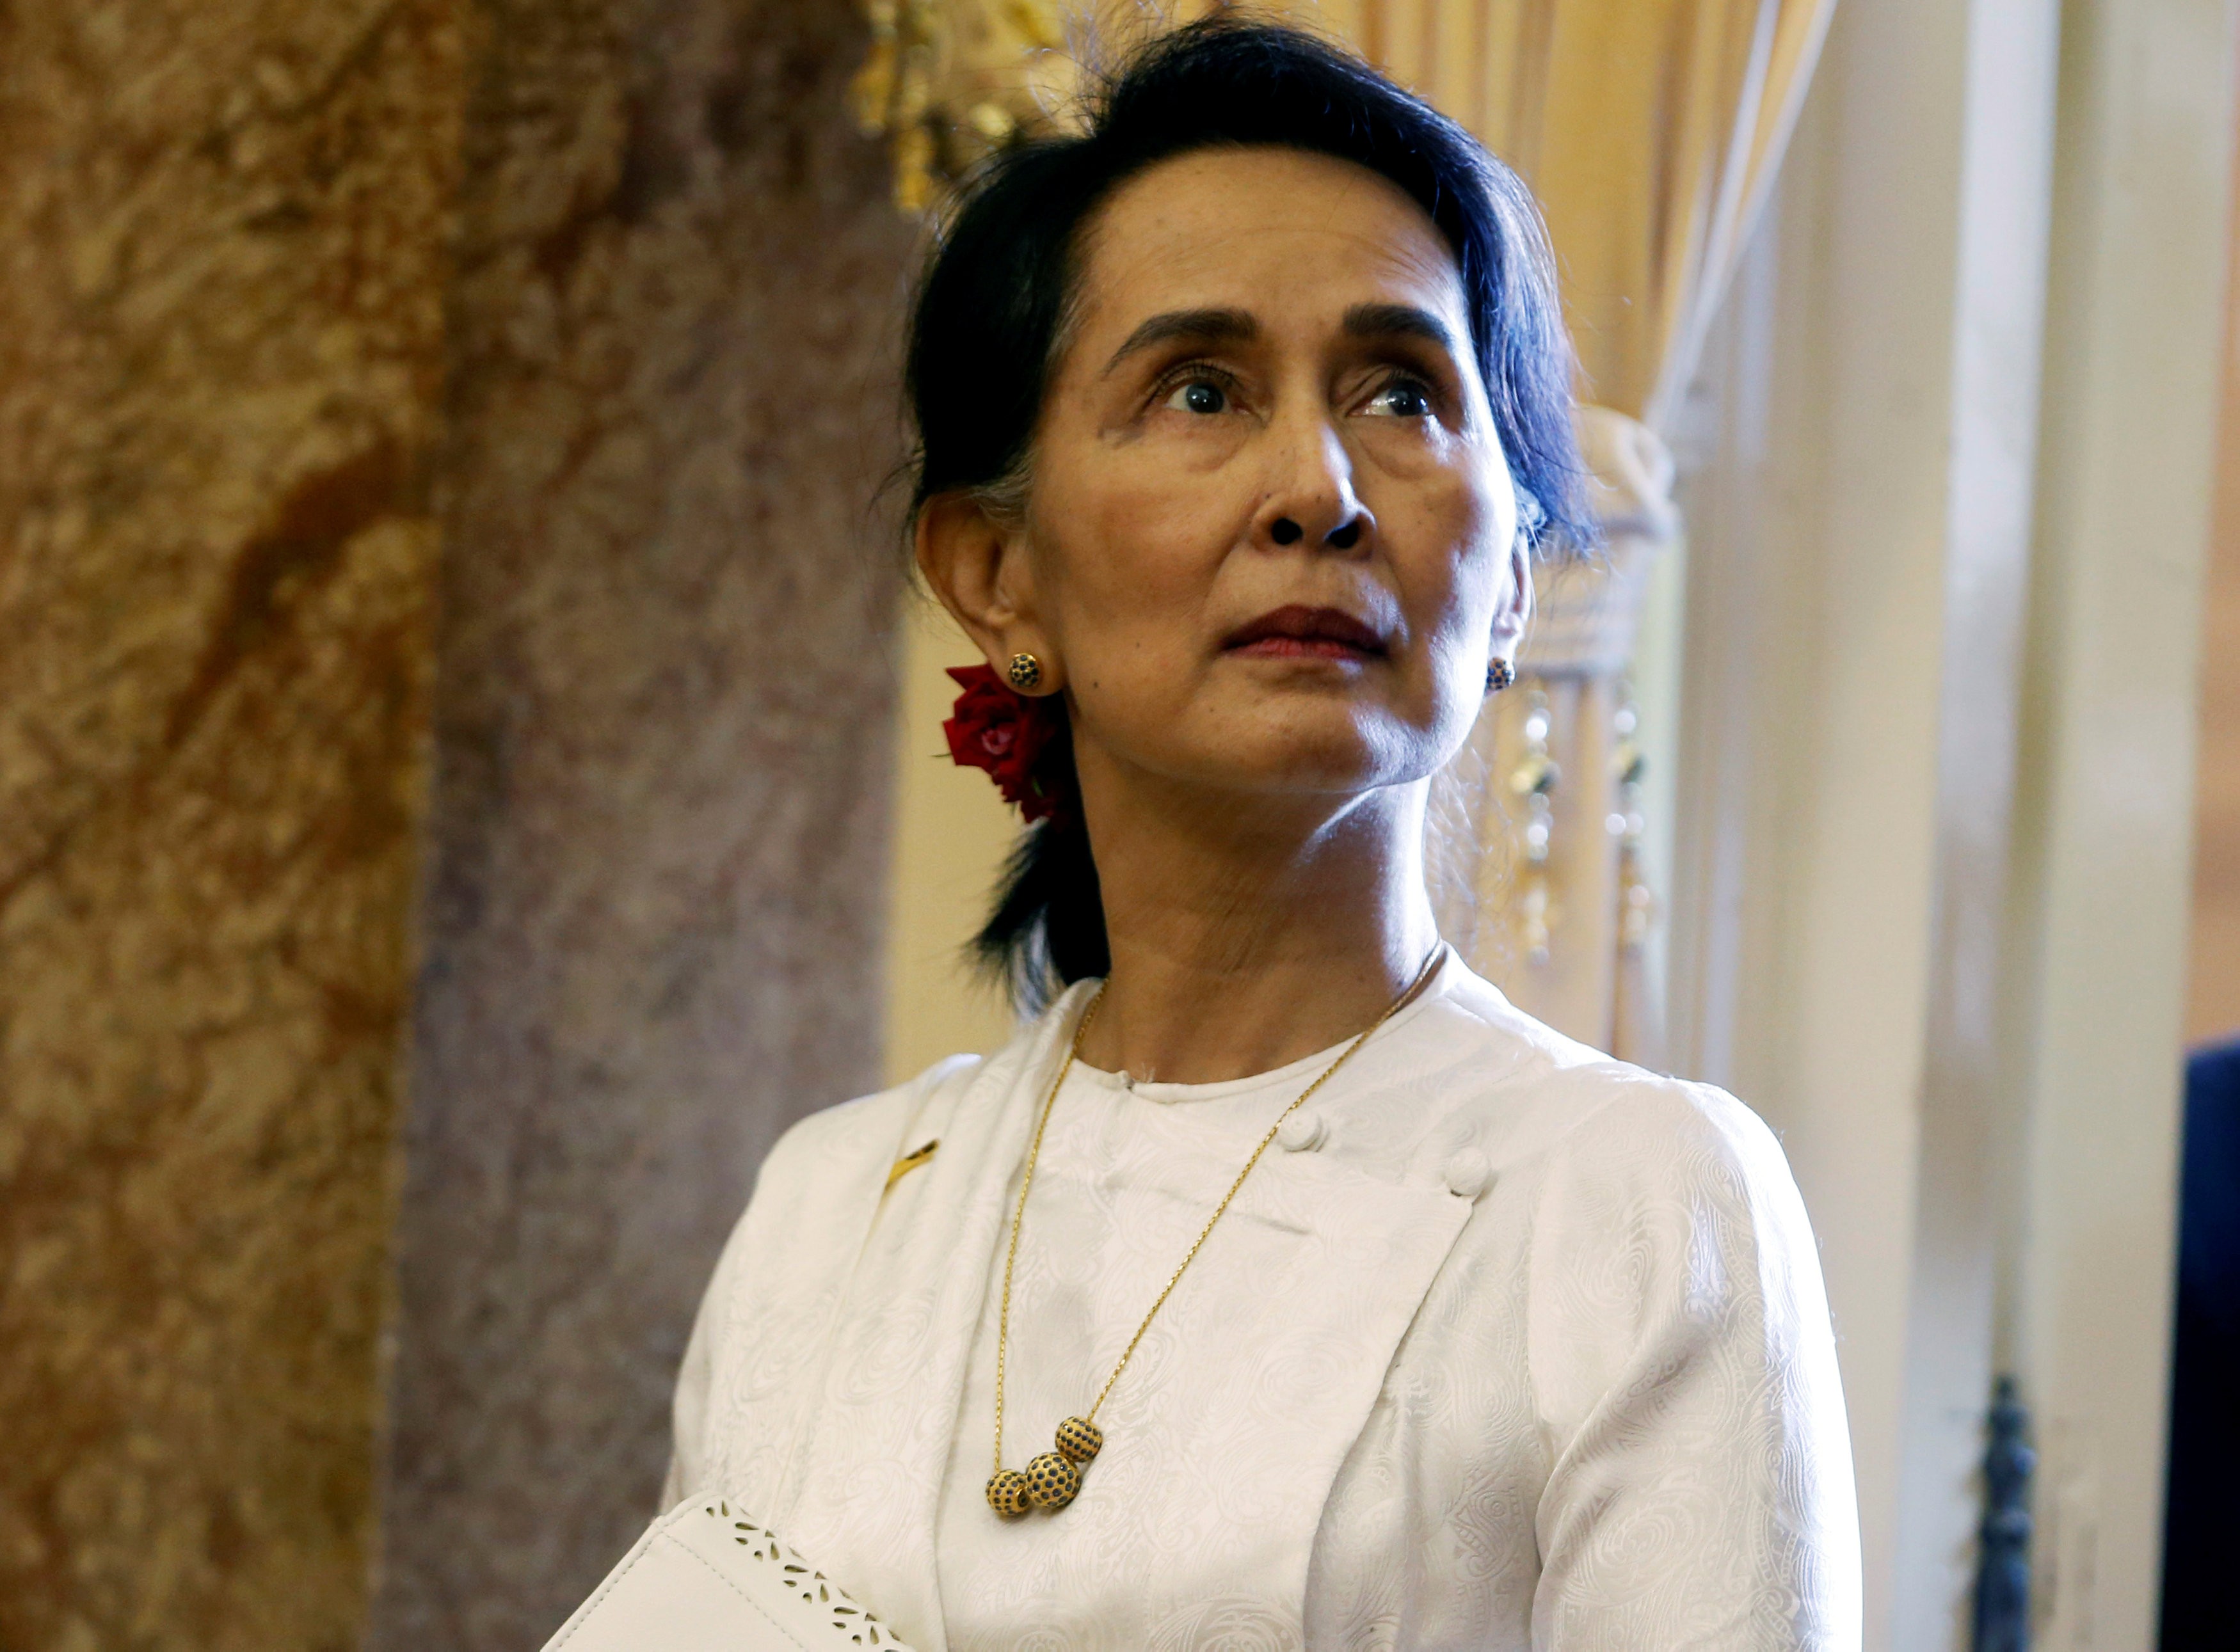 Myanmar's State Counsellor Aung San Suu Kyi waits for a meeting with Vietnam's President Tran Dai Quang in Hanoi on September 13. Photo: Reuters